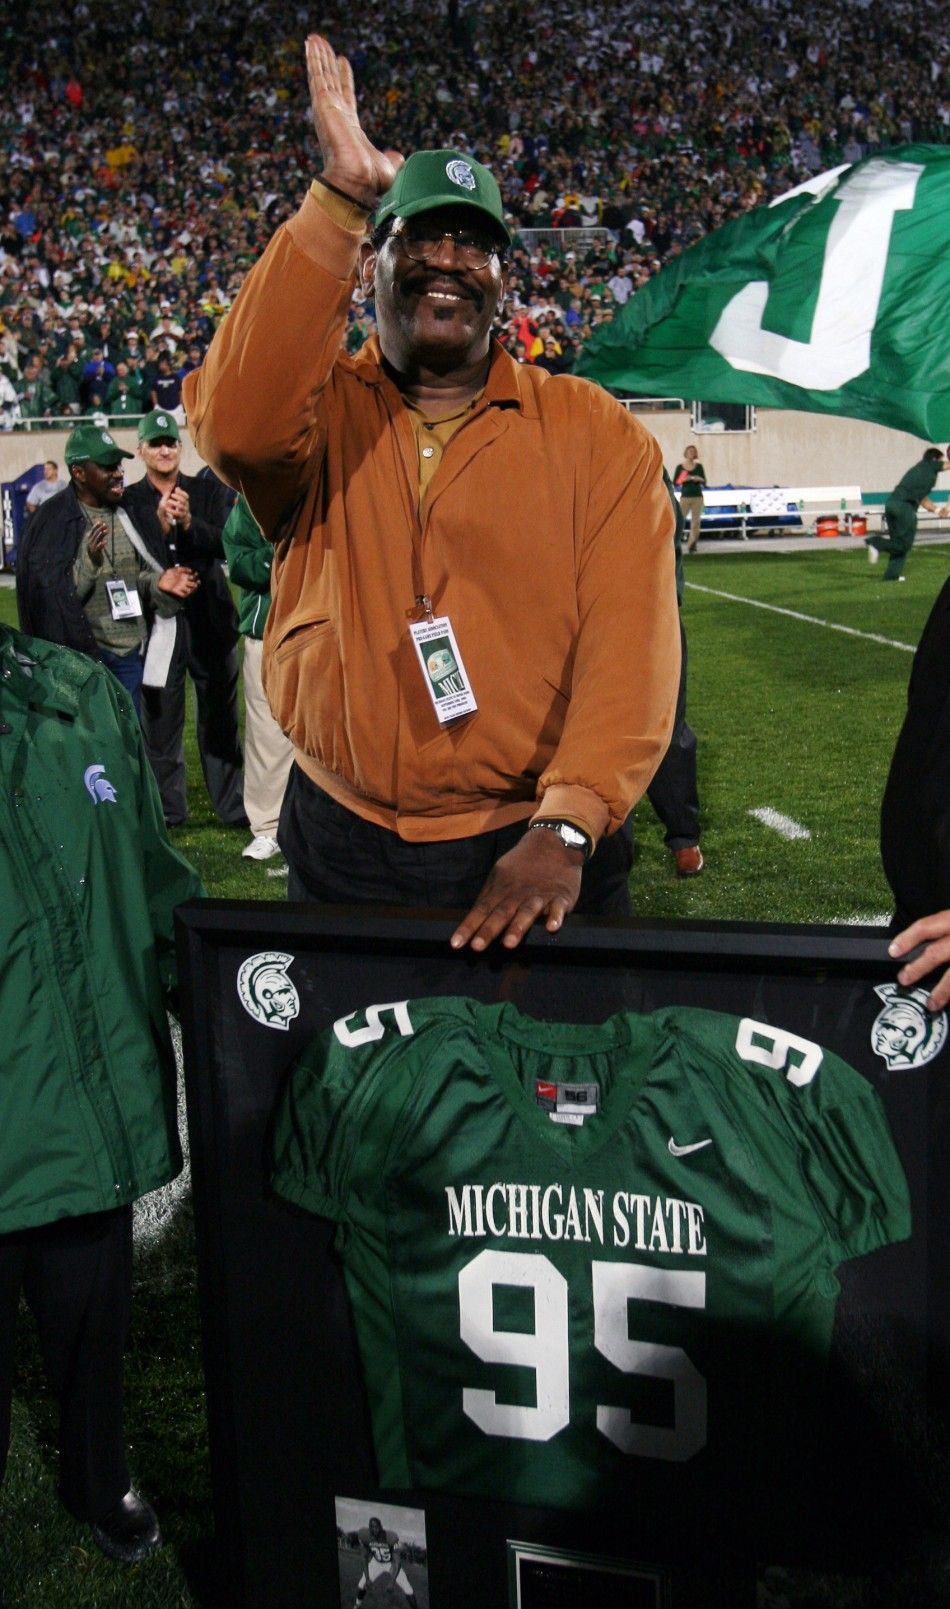 Former Michigan State football player and actor Smith reacts to having his jersey number retired in East Lansing Michigan